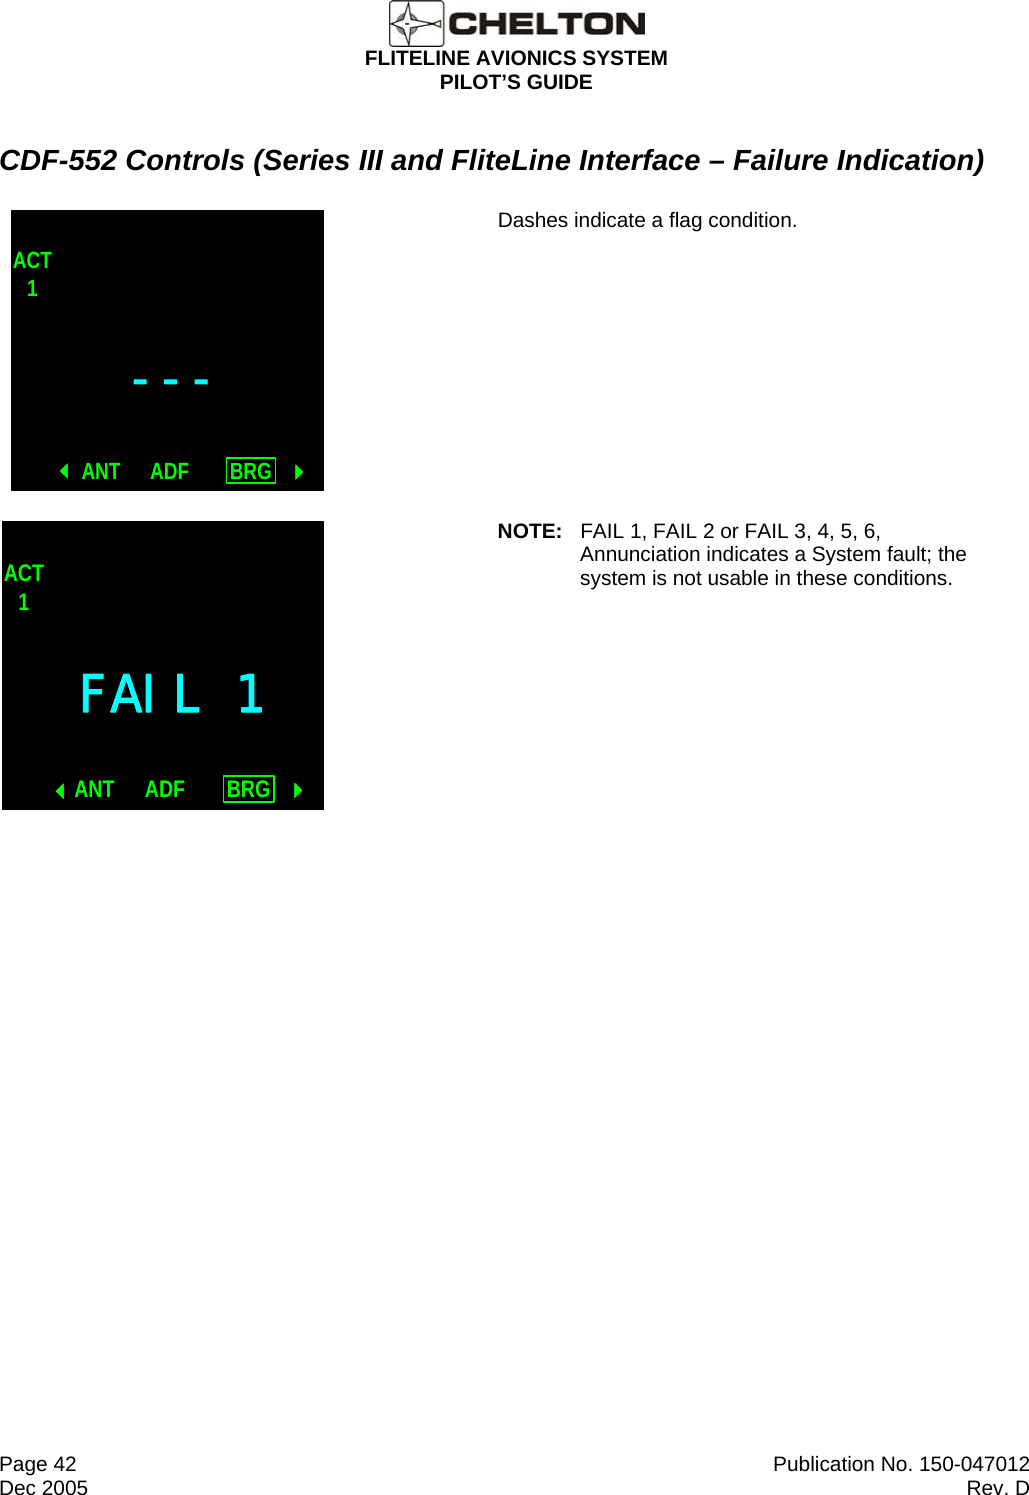  FLITELINE AVIONICS SYSTEM PILOT’S GUIDE  Page 42  Publication No. 150-047012 Dec 2005  Rev. D CDF-552 Controls (Series III and FliteLine Interface – Failure Indication) ---ACT1ANT BRGADF Dashes indicate a flag condition. FAIL 1ACT1ANT BRGADF NOTE:  FAIL 1, FAIL 2 or FAIL 3, 4, 5, 6, Annunciation indicates a System fault; the system is not usable in these conditions. 